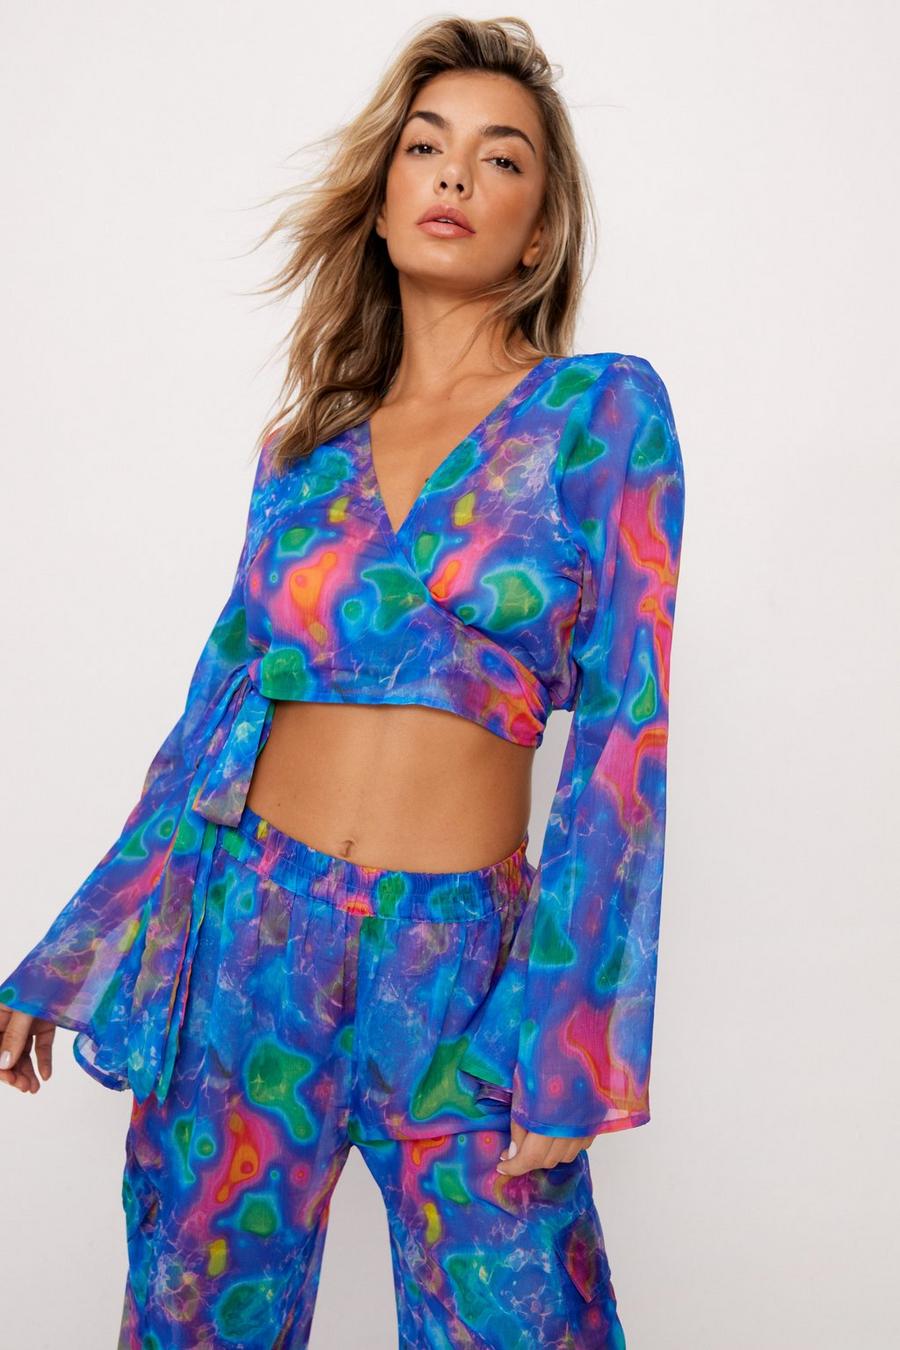 Basic Crinkle Chiffon Water Print Wrap Cover Up Top